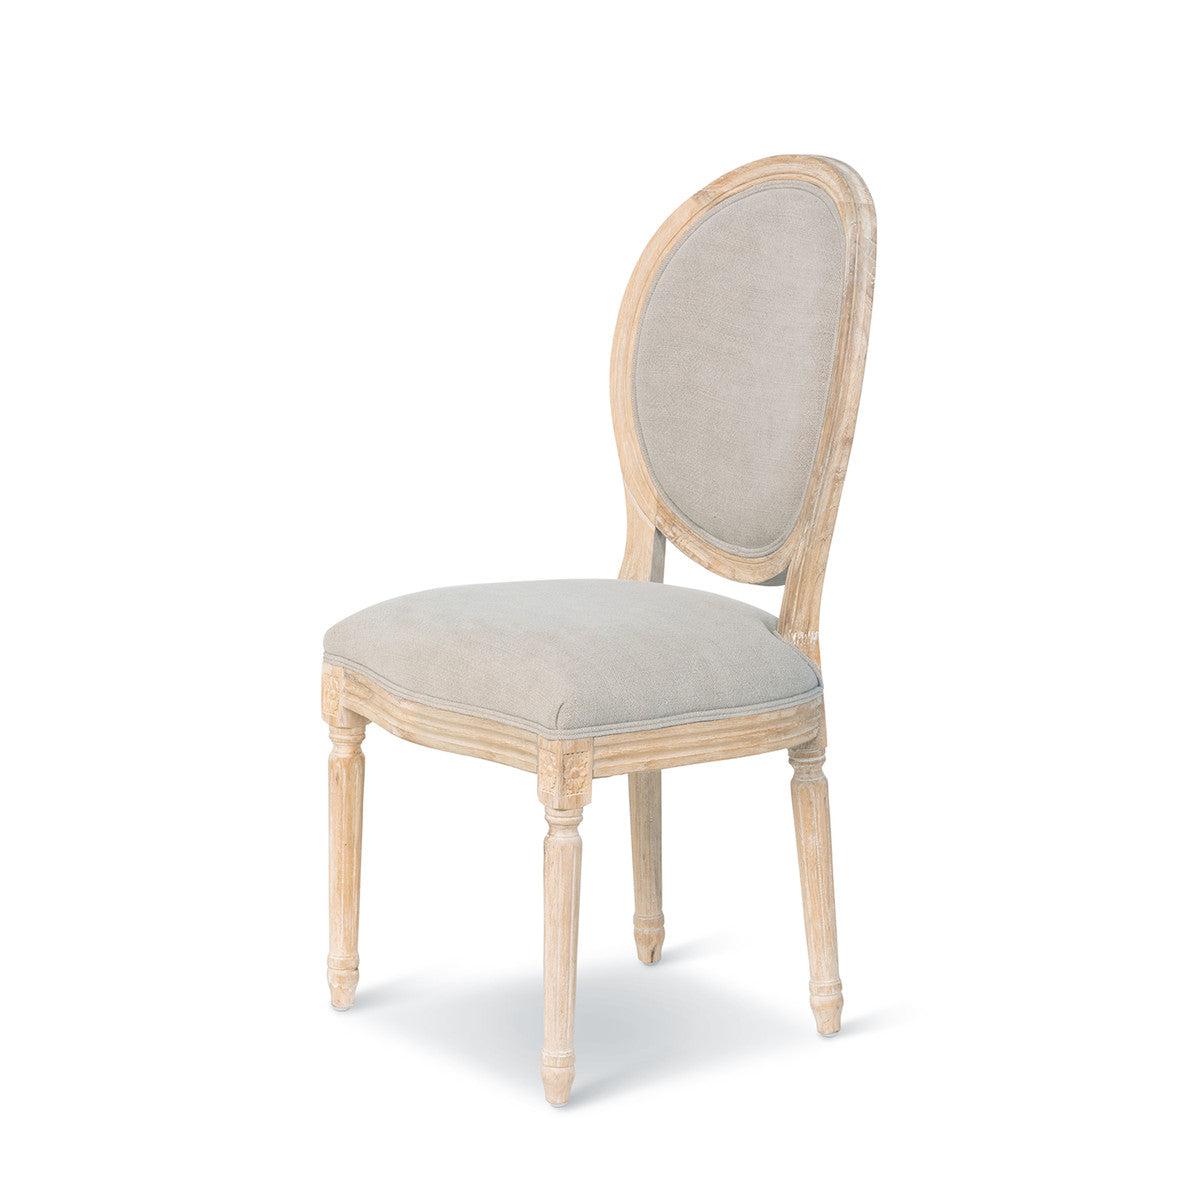 the-whitney-dining-chair-dining-chair-park-hill-4-Threadbare Gypsy Soul